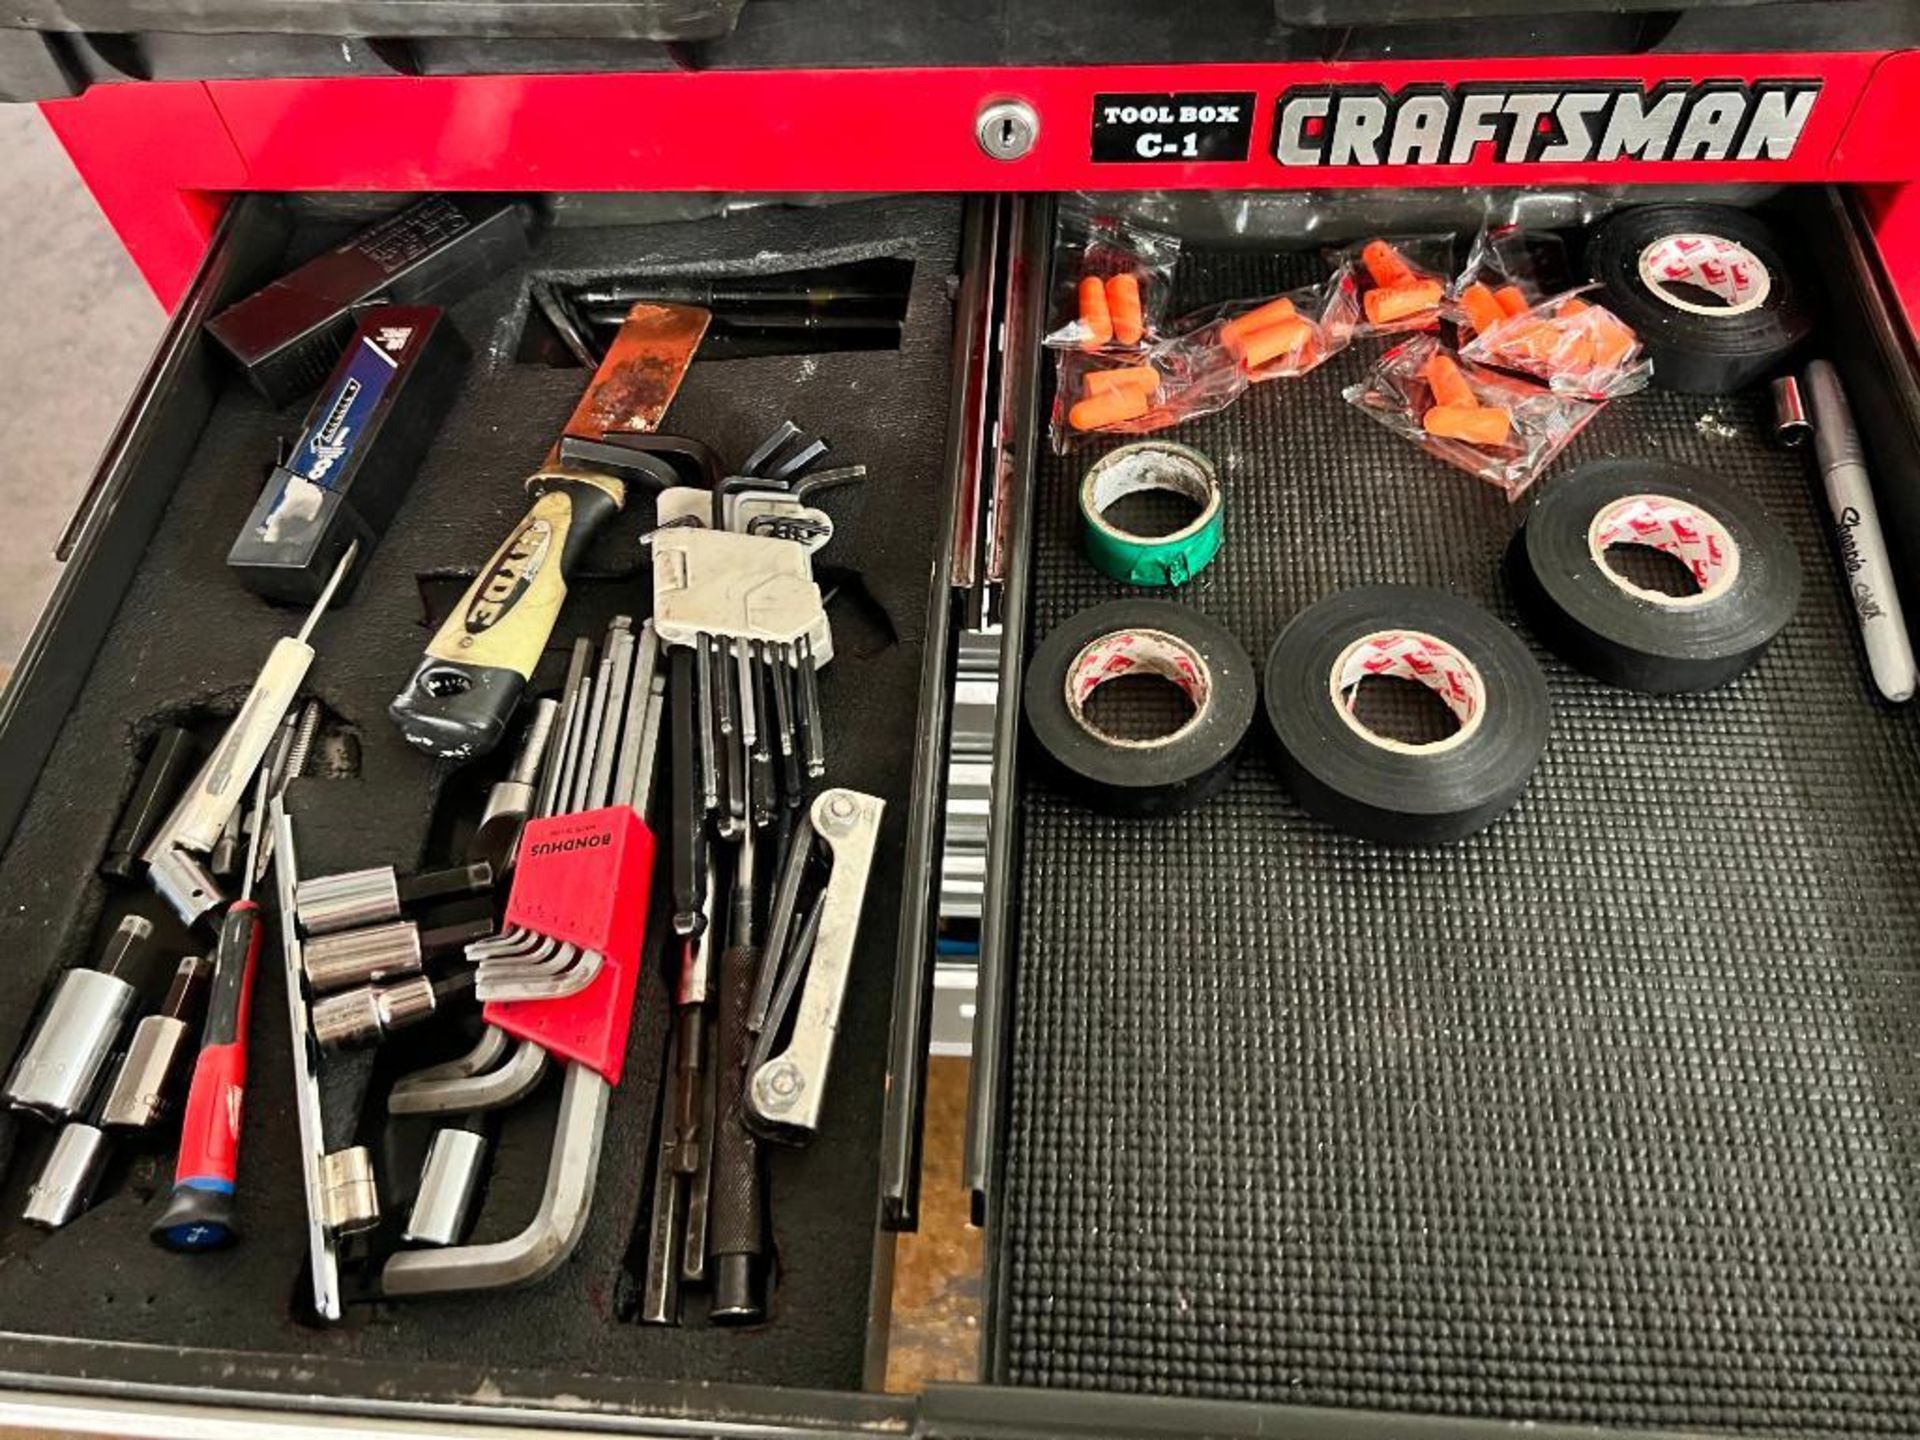 Craftsman 11-Drawer Rolling Toolbox w/ Content of Assorted Tools - Image 2 of 10